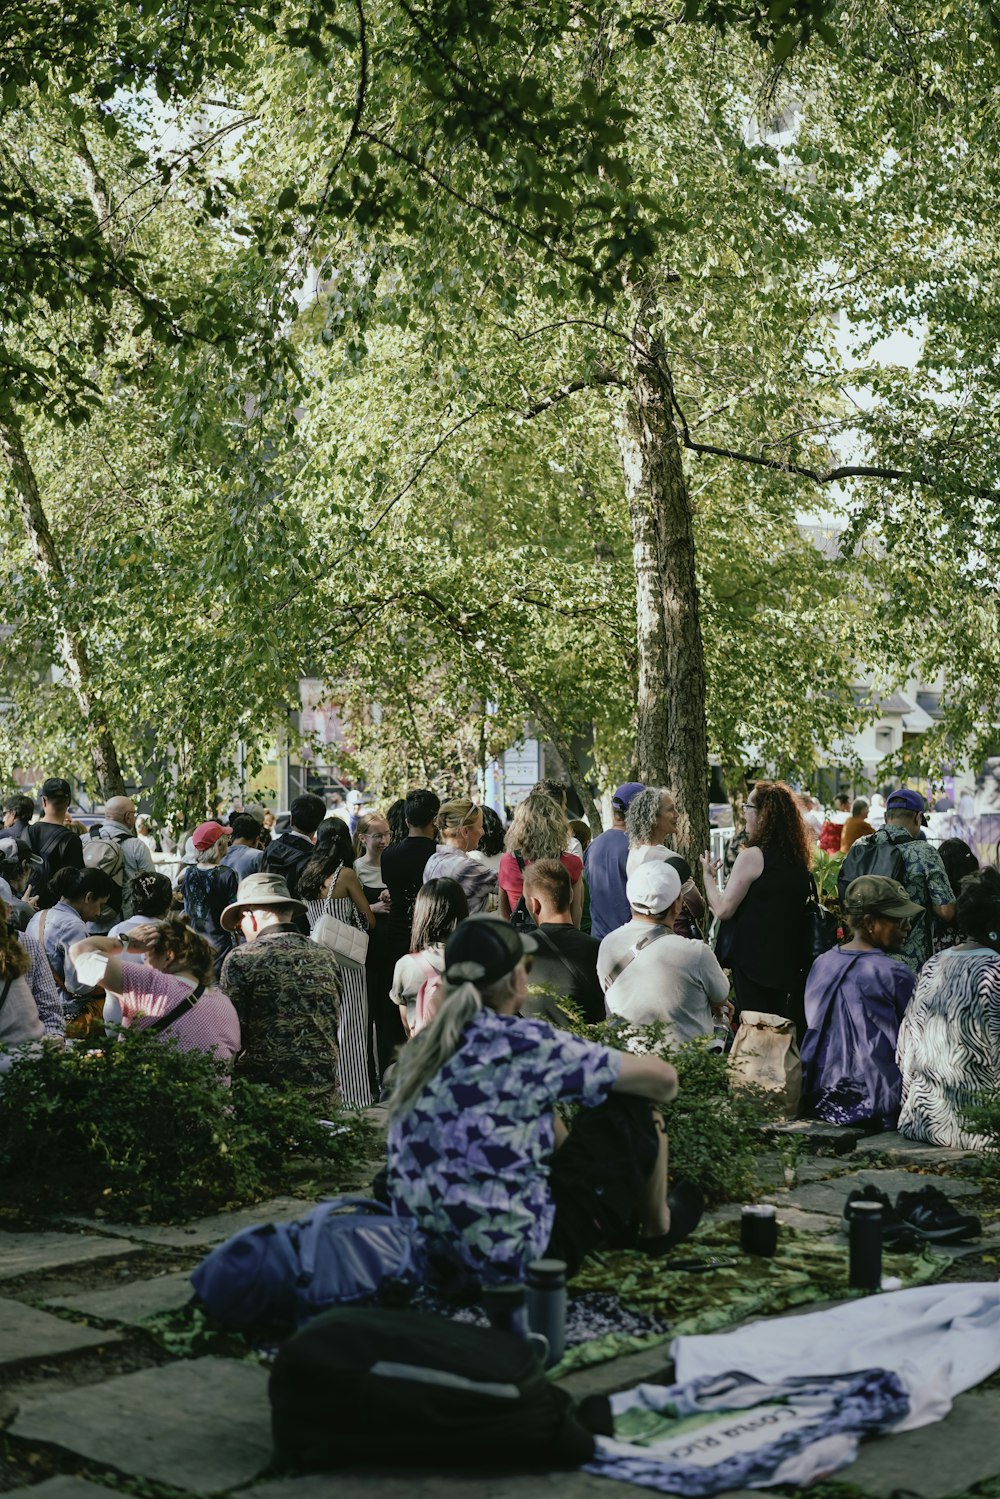 a group of people sitting on the ground under a tree